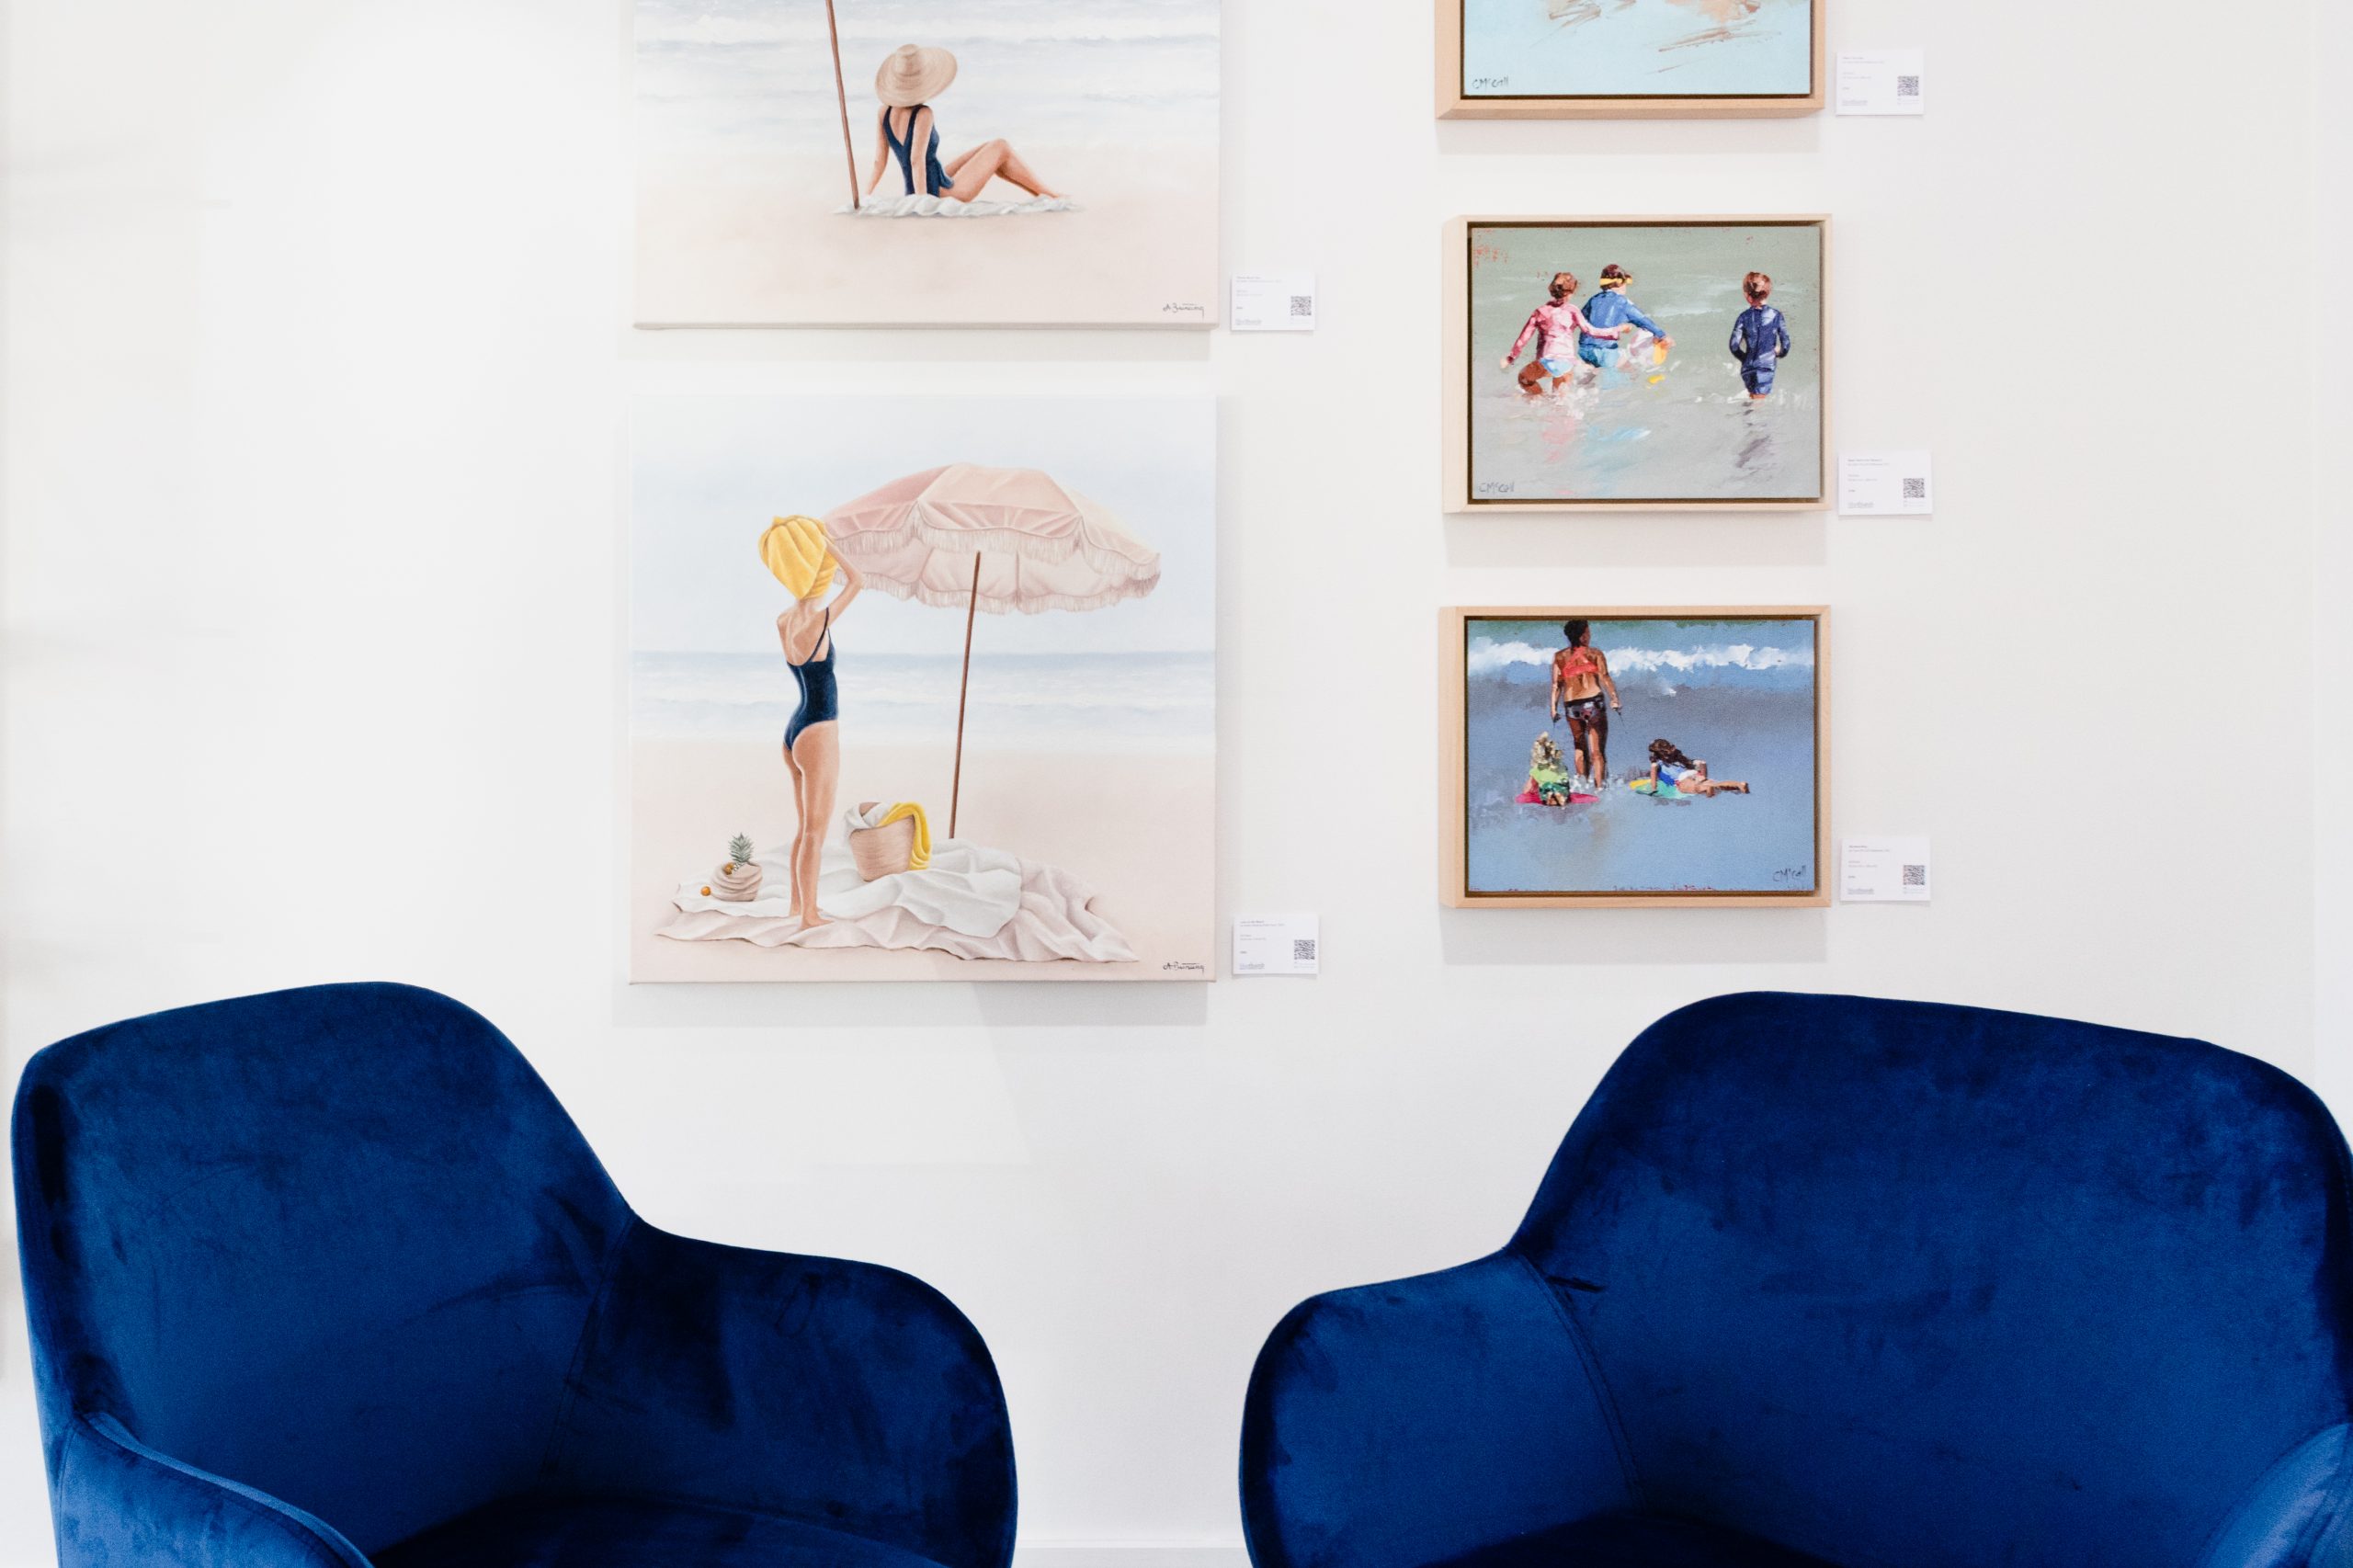 Instant Bluethumb payment methods. Photo of 2 blue chairs in front of pastel colour beach scene artworks.